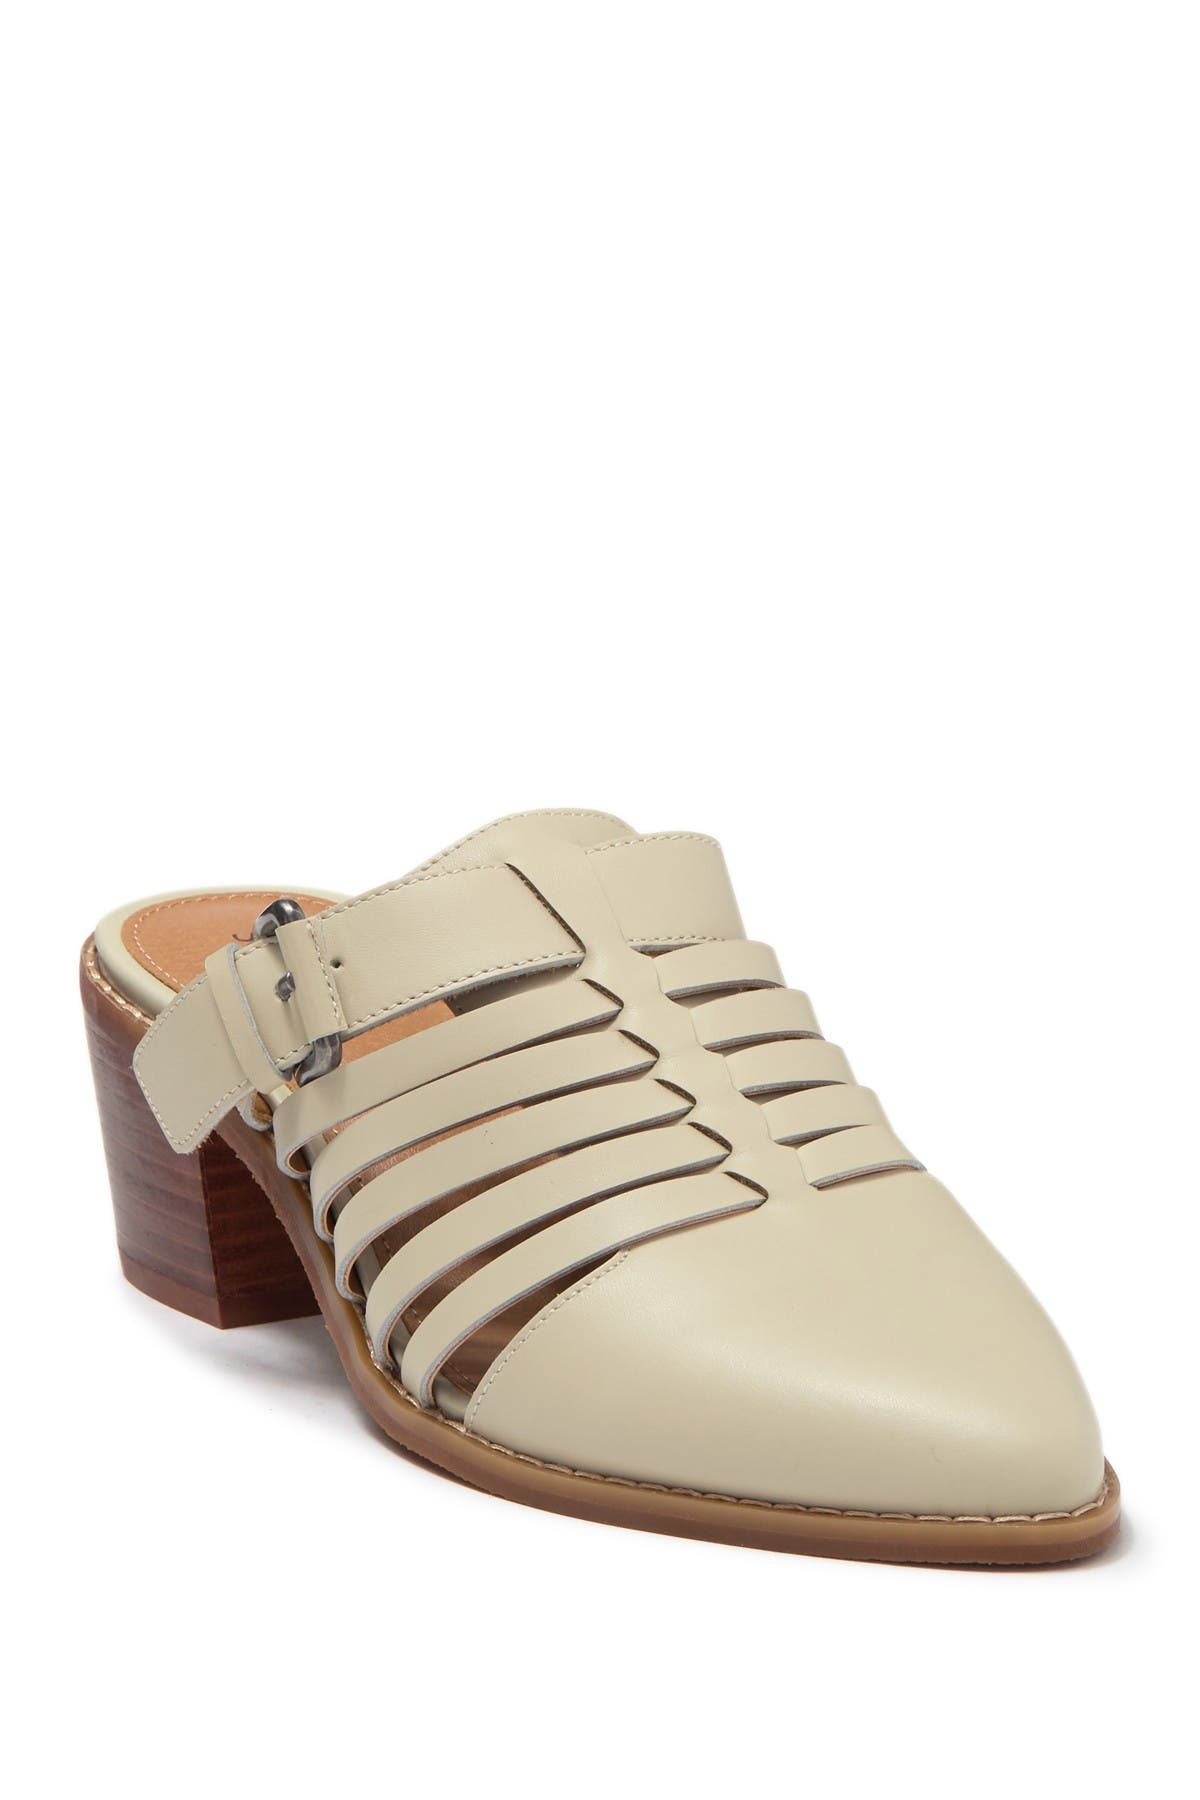 susina shoes nordstrom rack